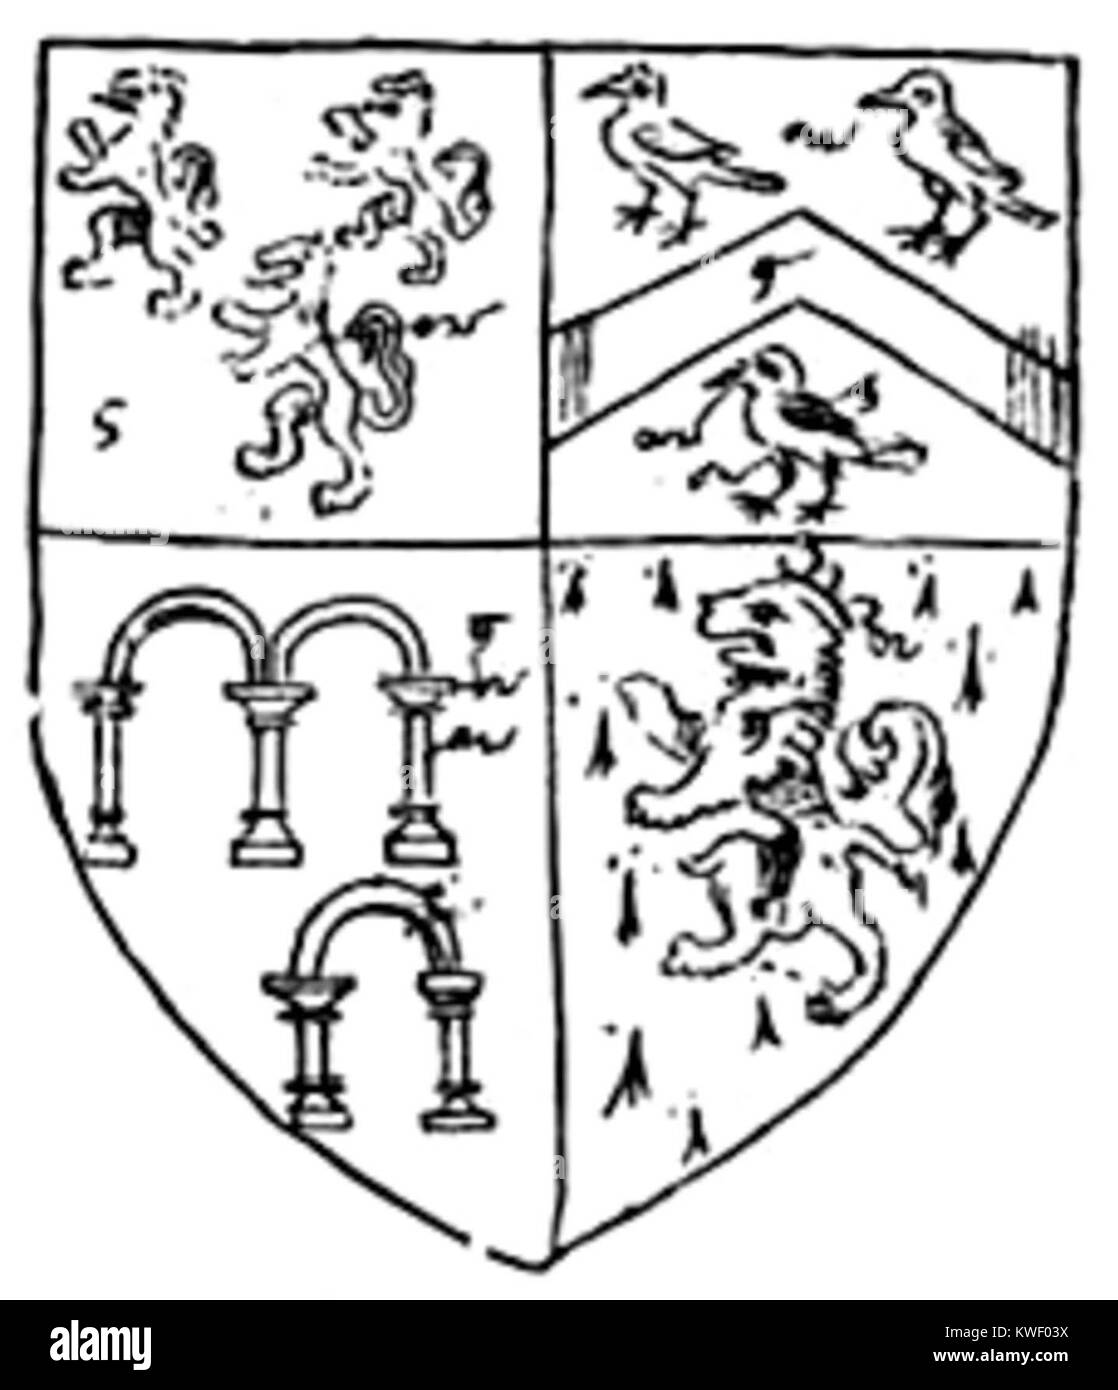 Arms of Eyston family of East Hendred, Berkshire, as drawn in 1556 by William Harvey, Clarencieux King of Arms, published in the Heraldic Visitations of Berkshire, Harleian Publication no 56, 1907, p.26. Showing quarterly, 1st: Eyston; 2nd: Stowe; 3rd: Arches 4th: Turberville Stock Photo